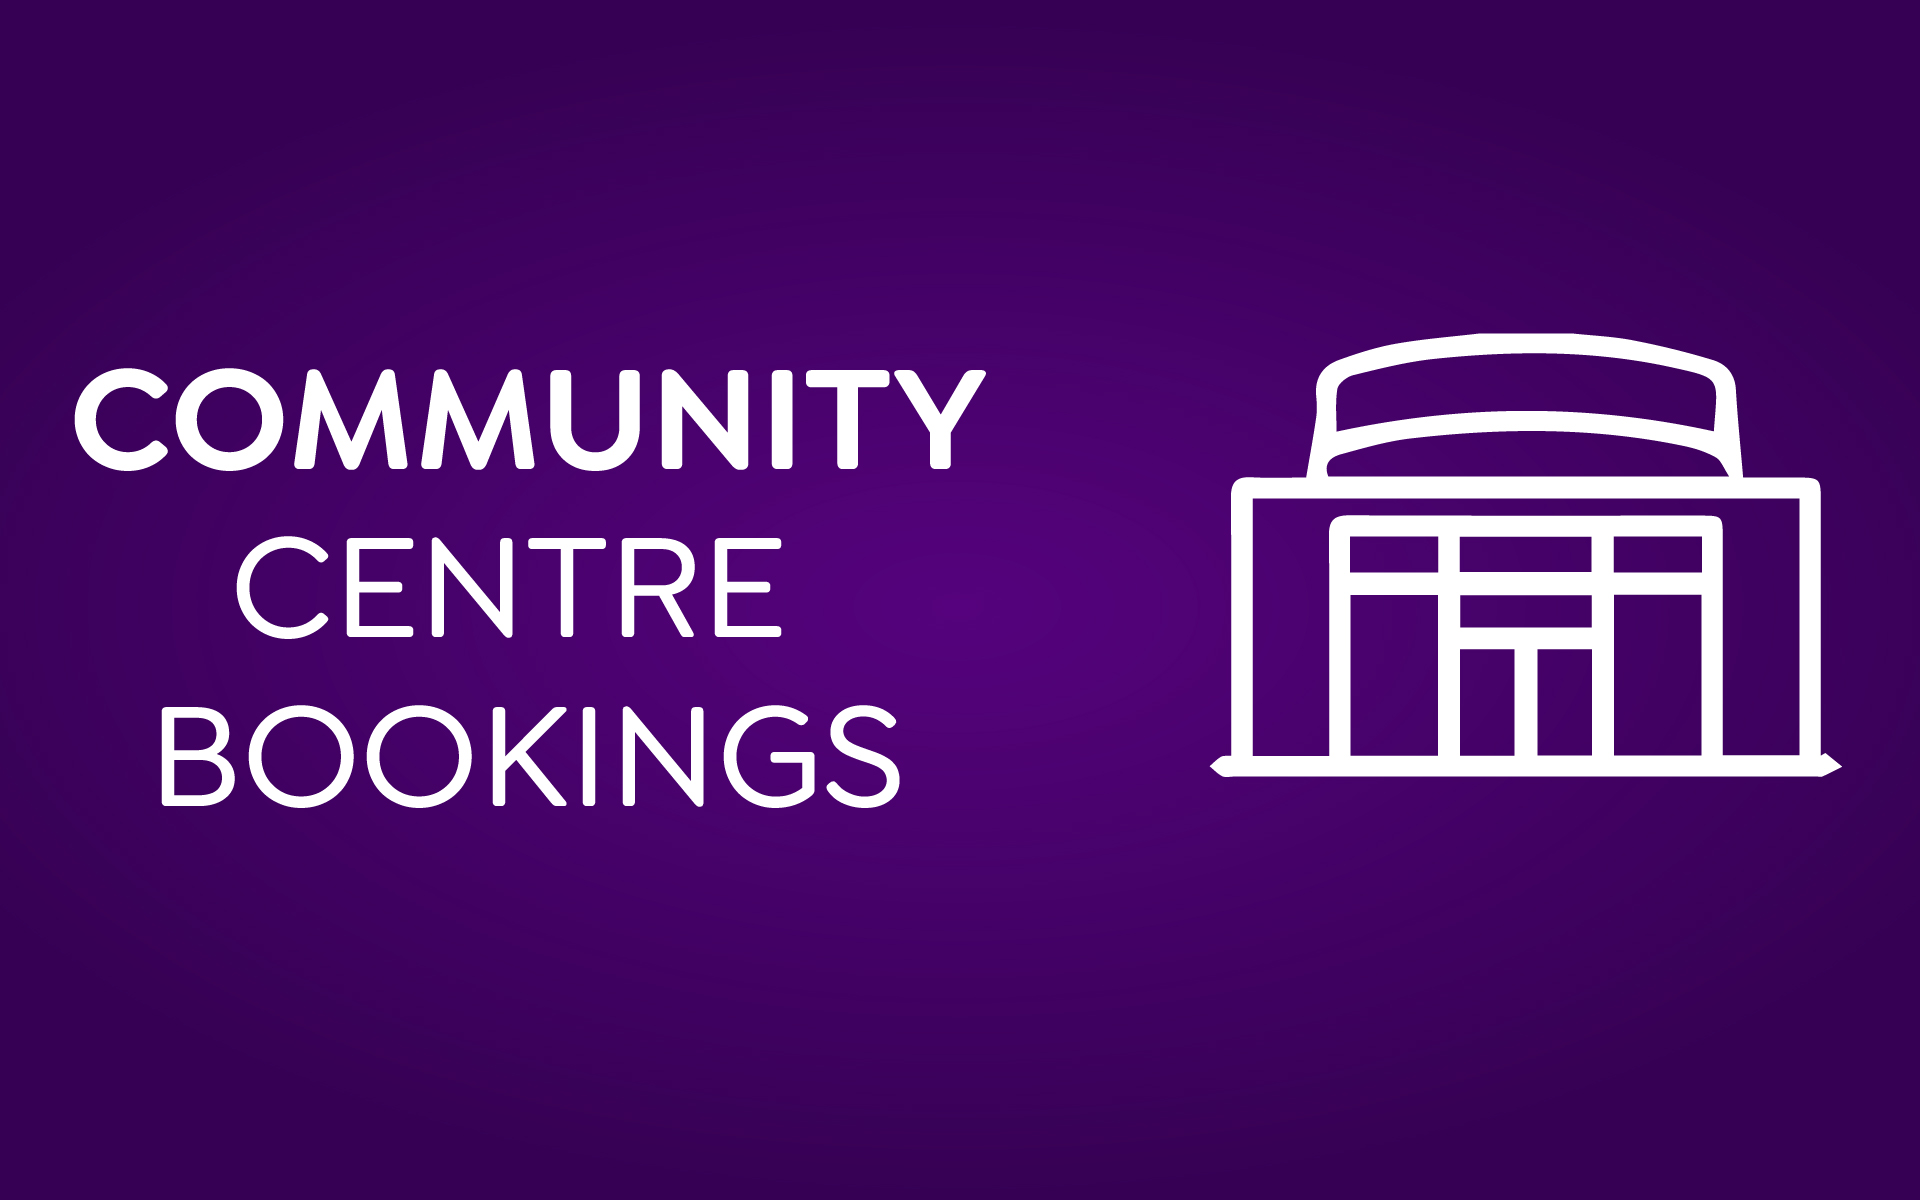 Community Centre Bookings